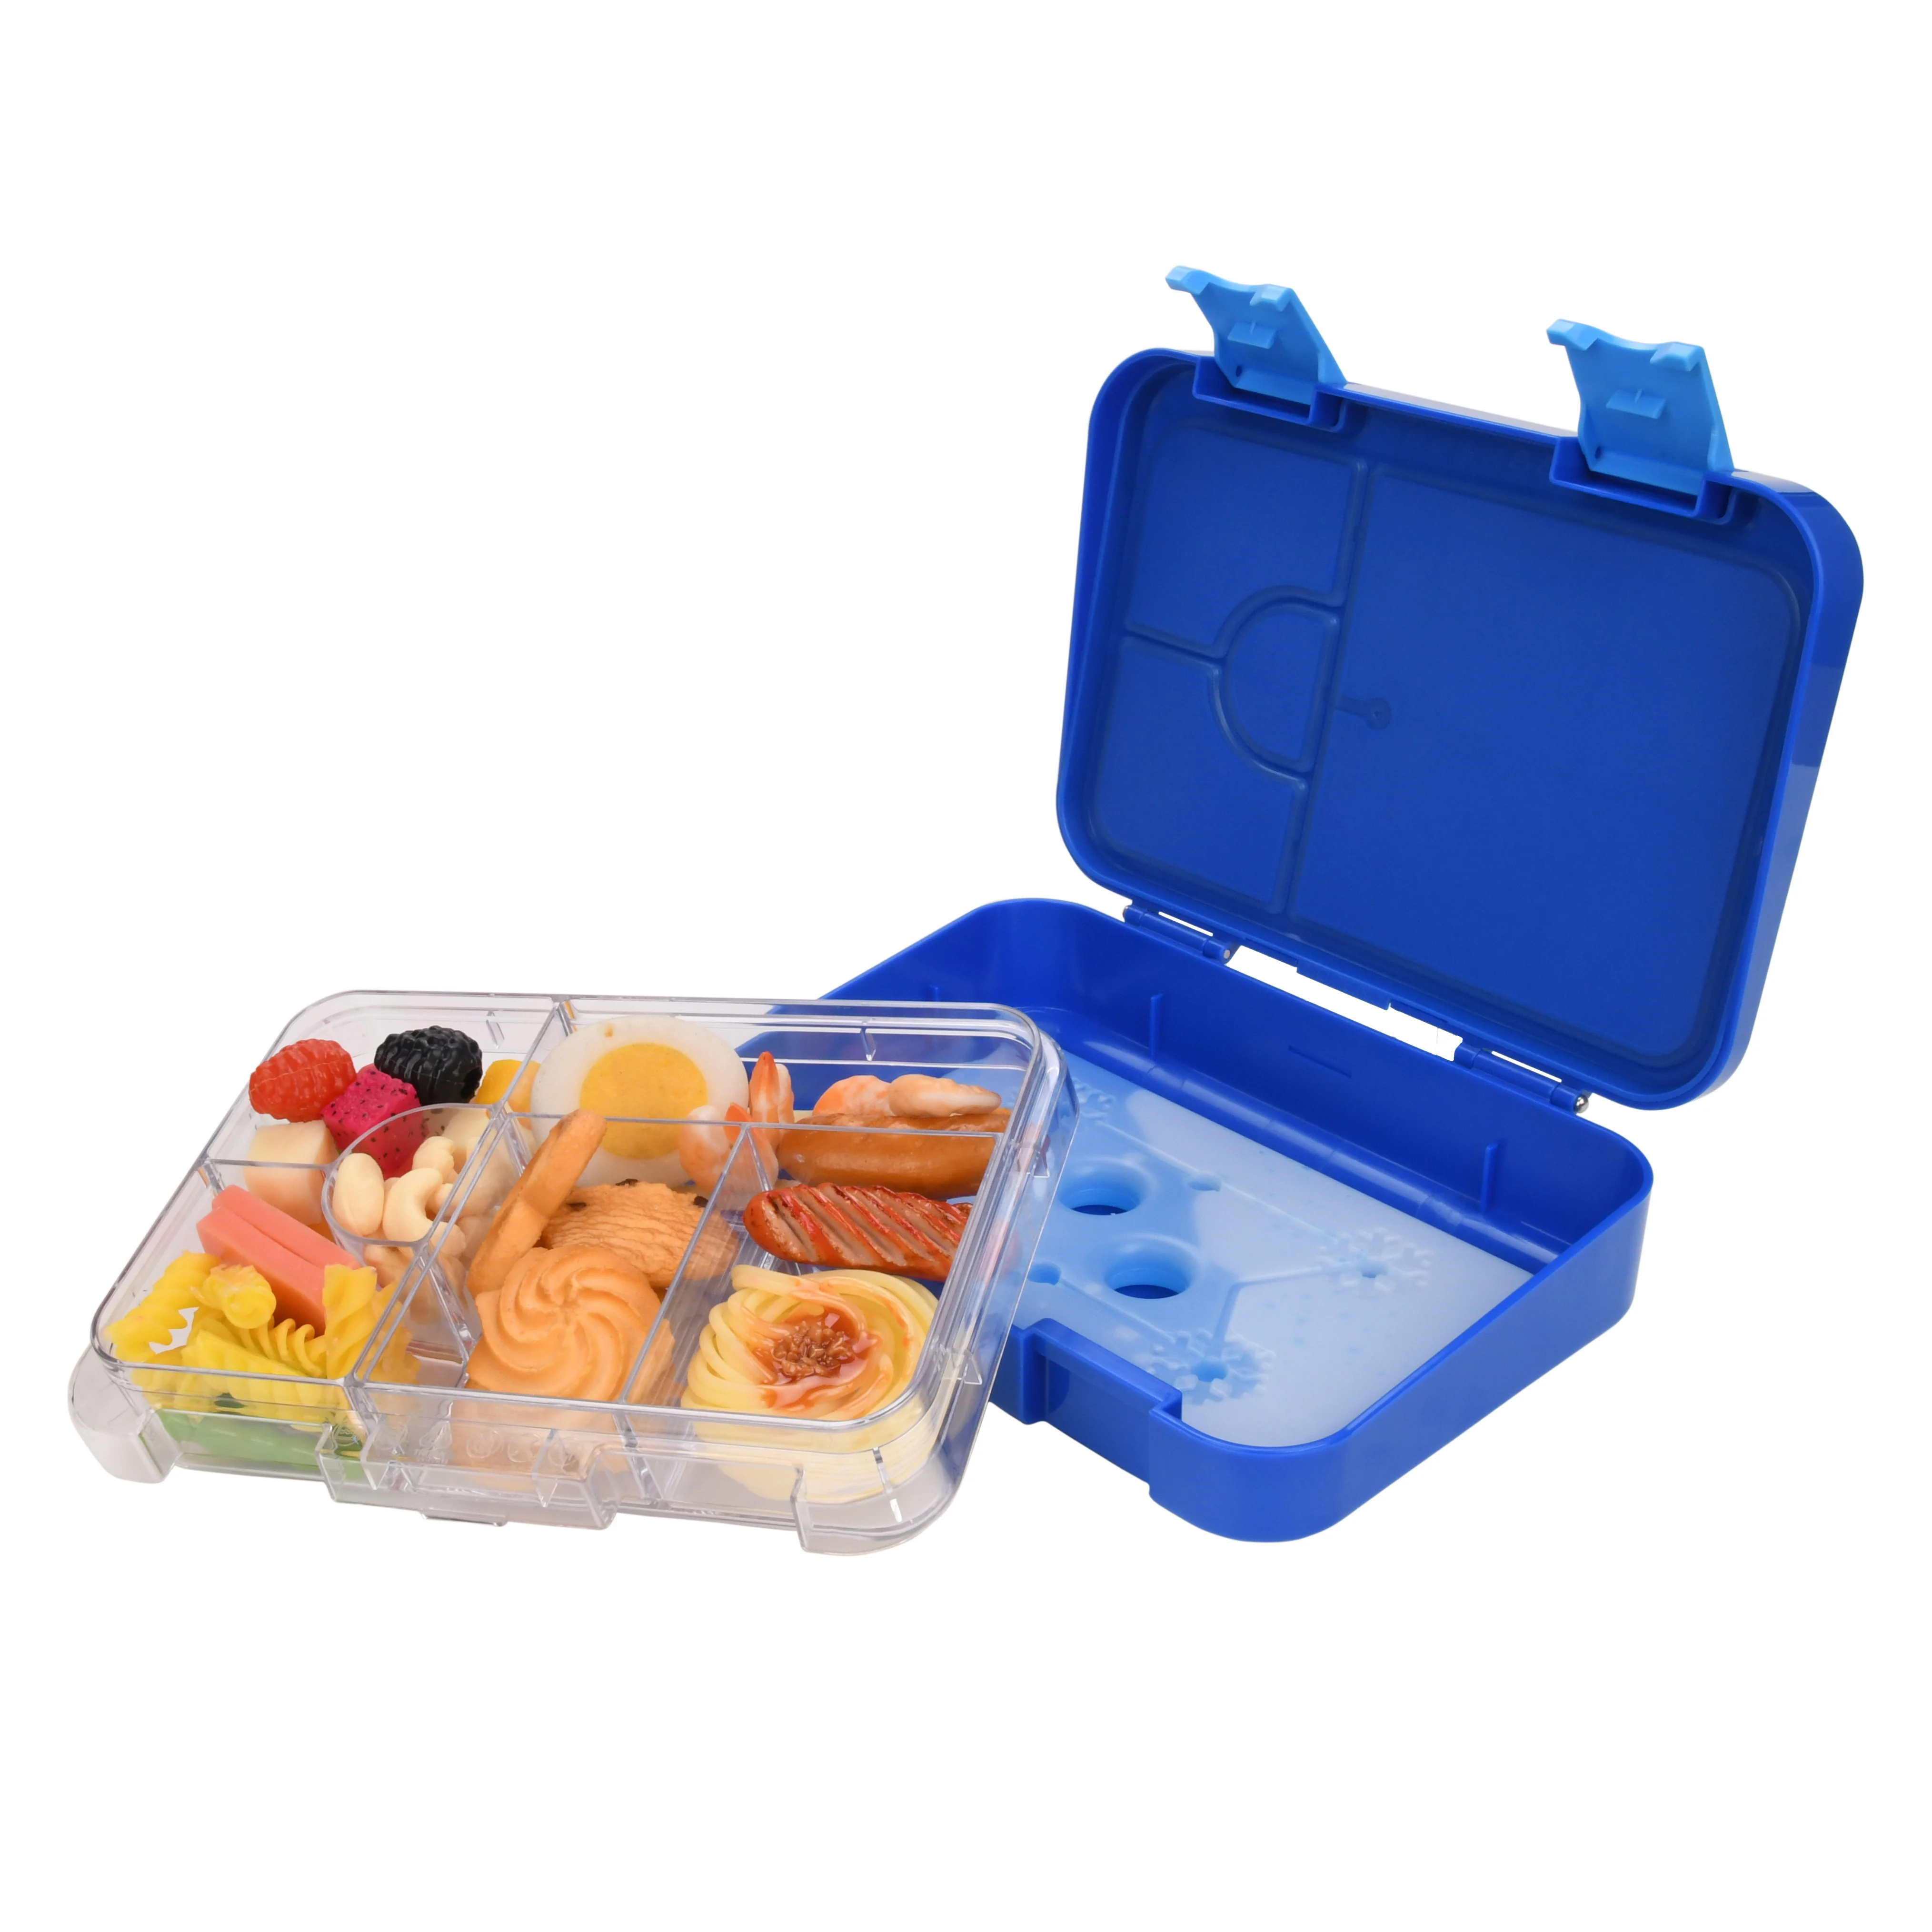 

Aohea Freeze Evenly Kids Chill Lunchbox Removable Ice Pack Ice 6 Compartments LeakProof Dishwasher Safe bento lunch box for kids